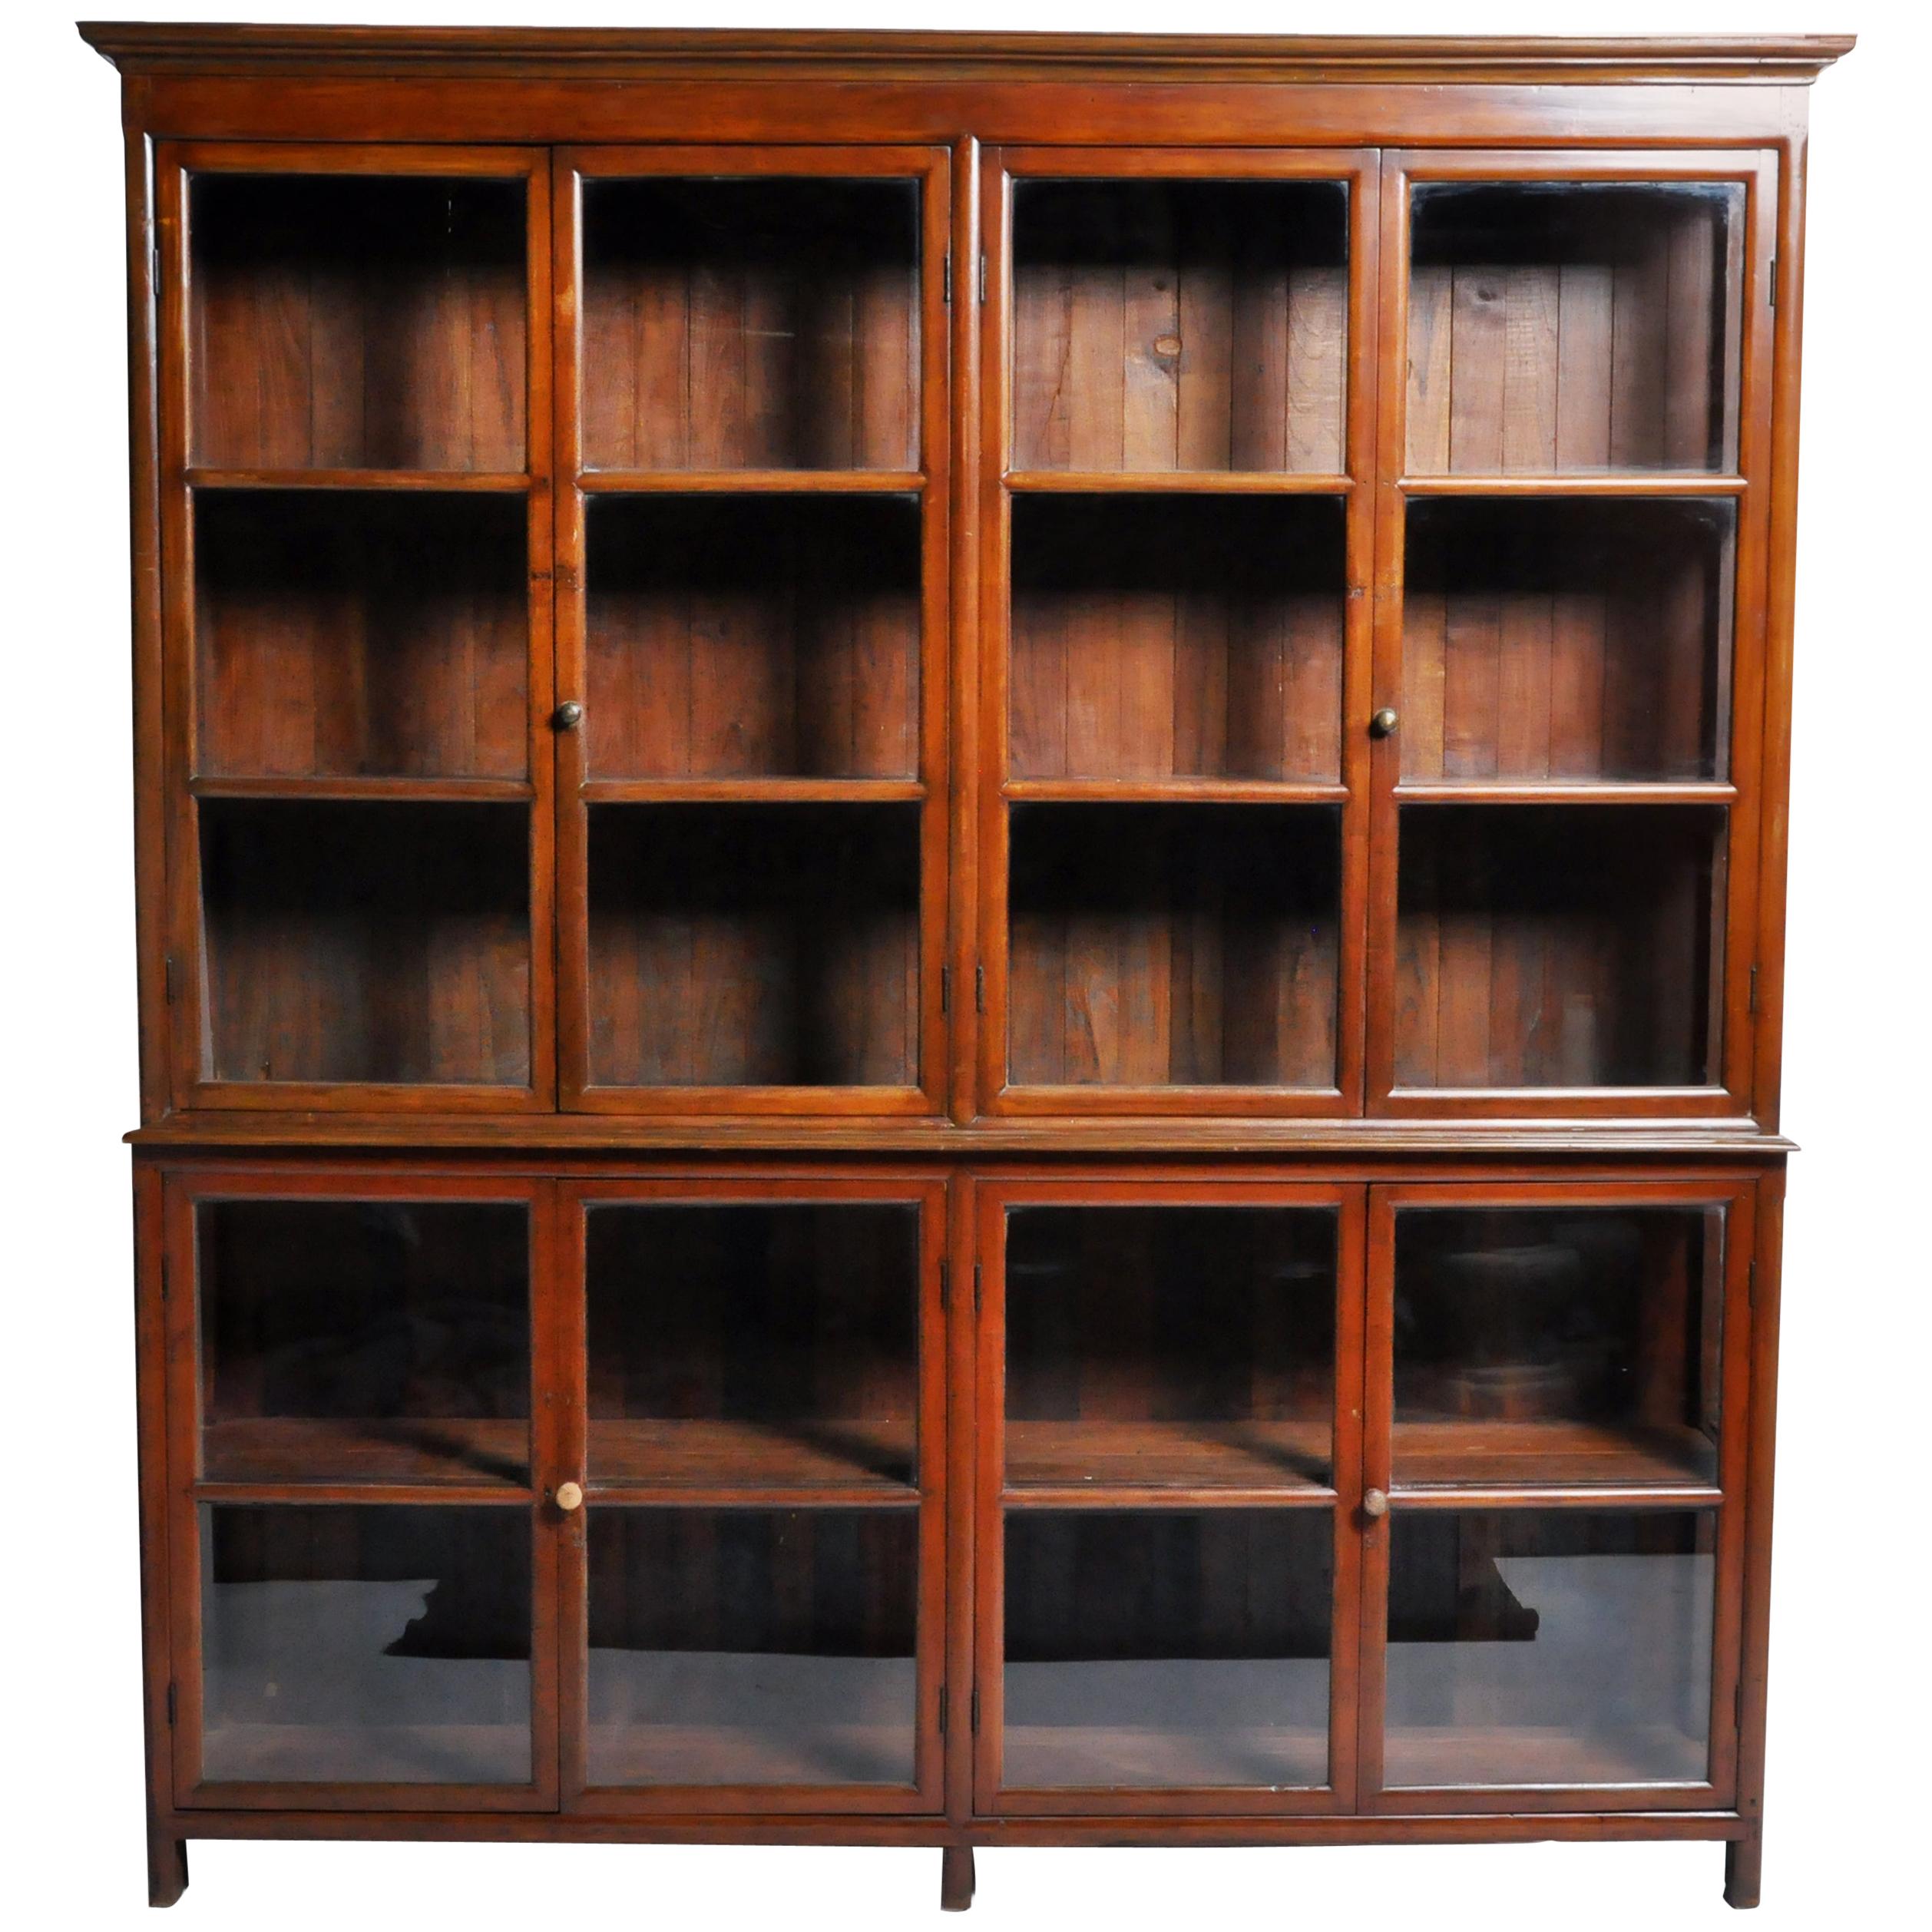 British Colonial Art Deco Breakfront Bookcase with Four Pairs of Doors